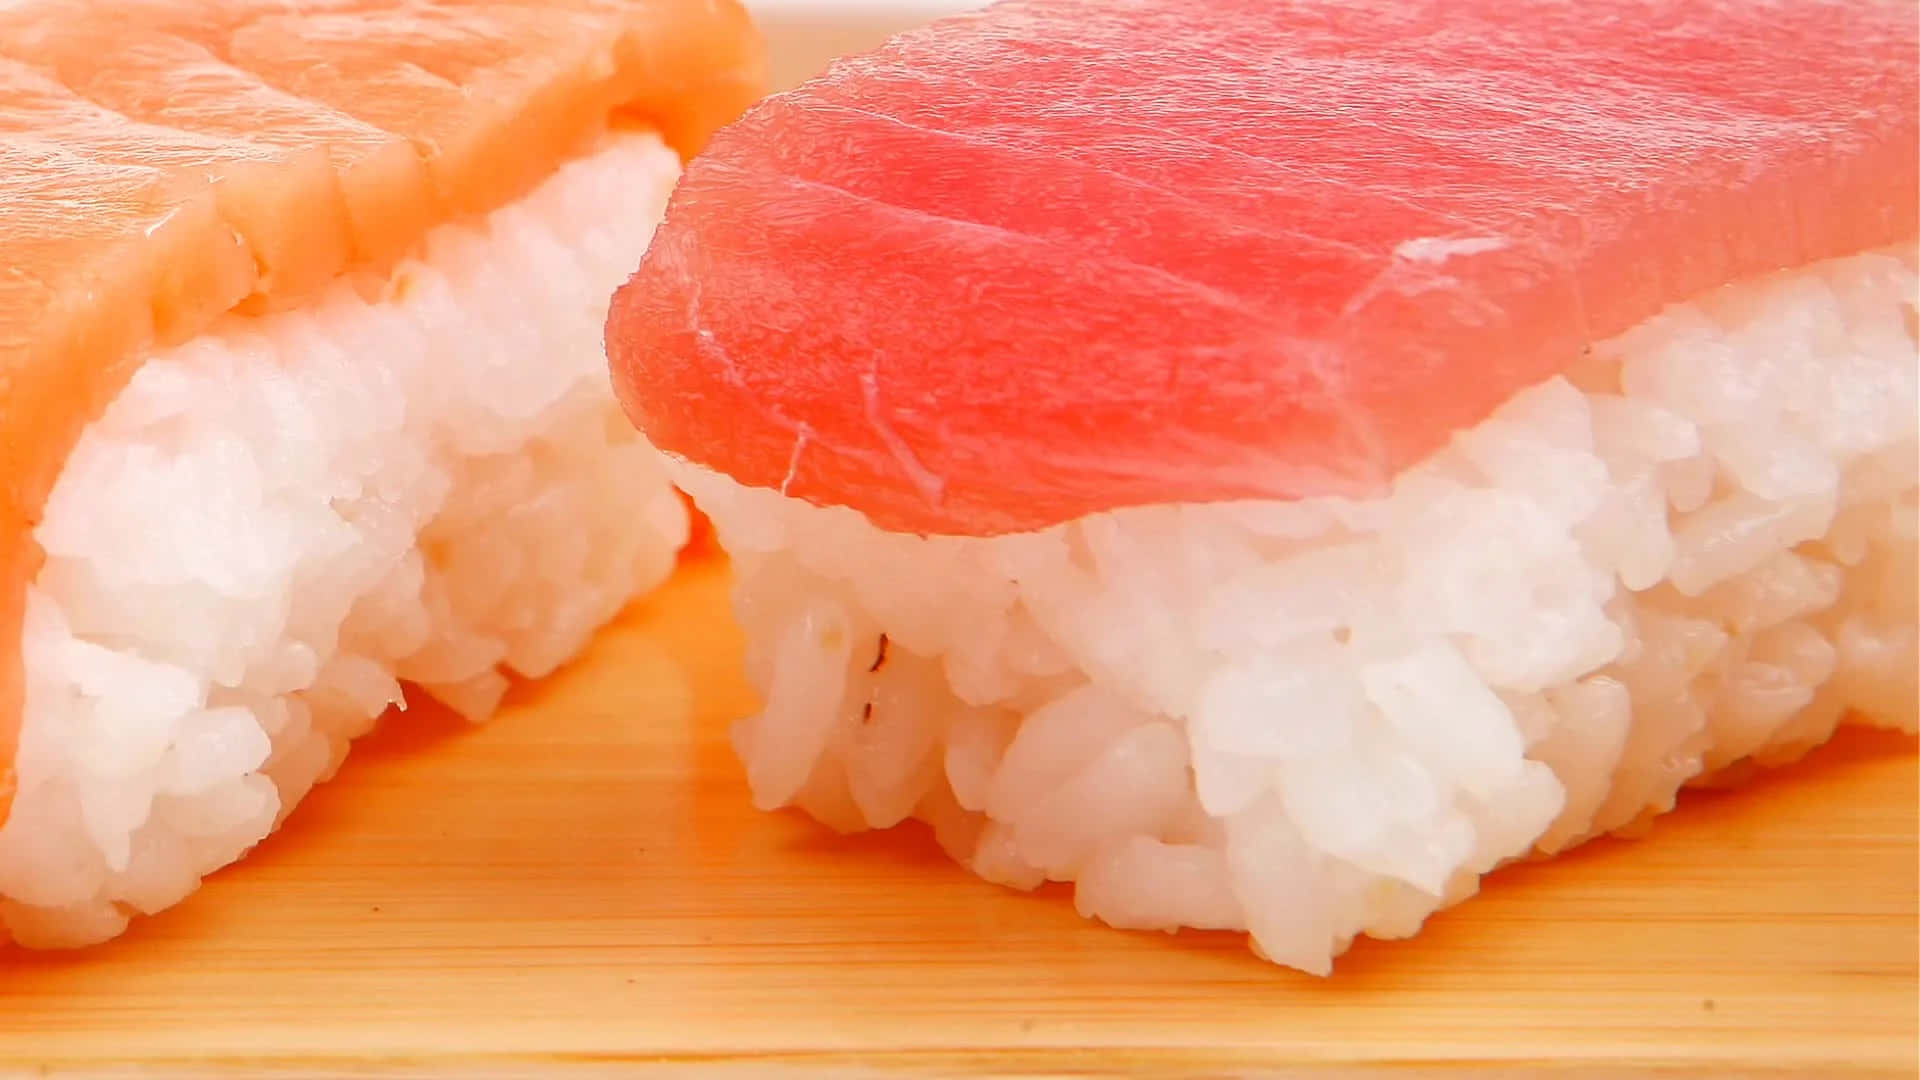 Types Of Sushi In A Close-Up Picture